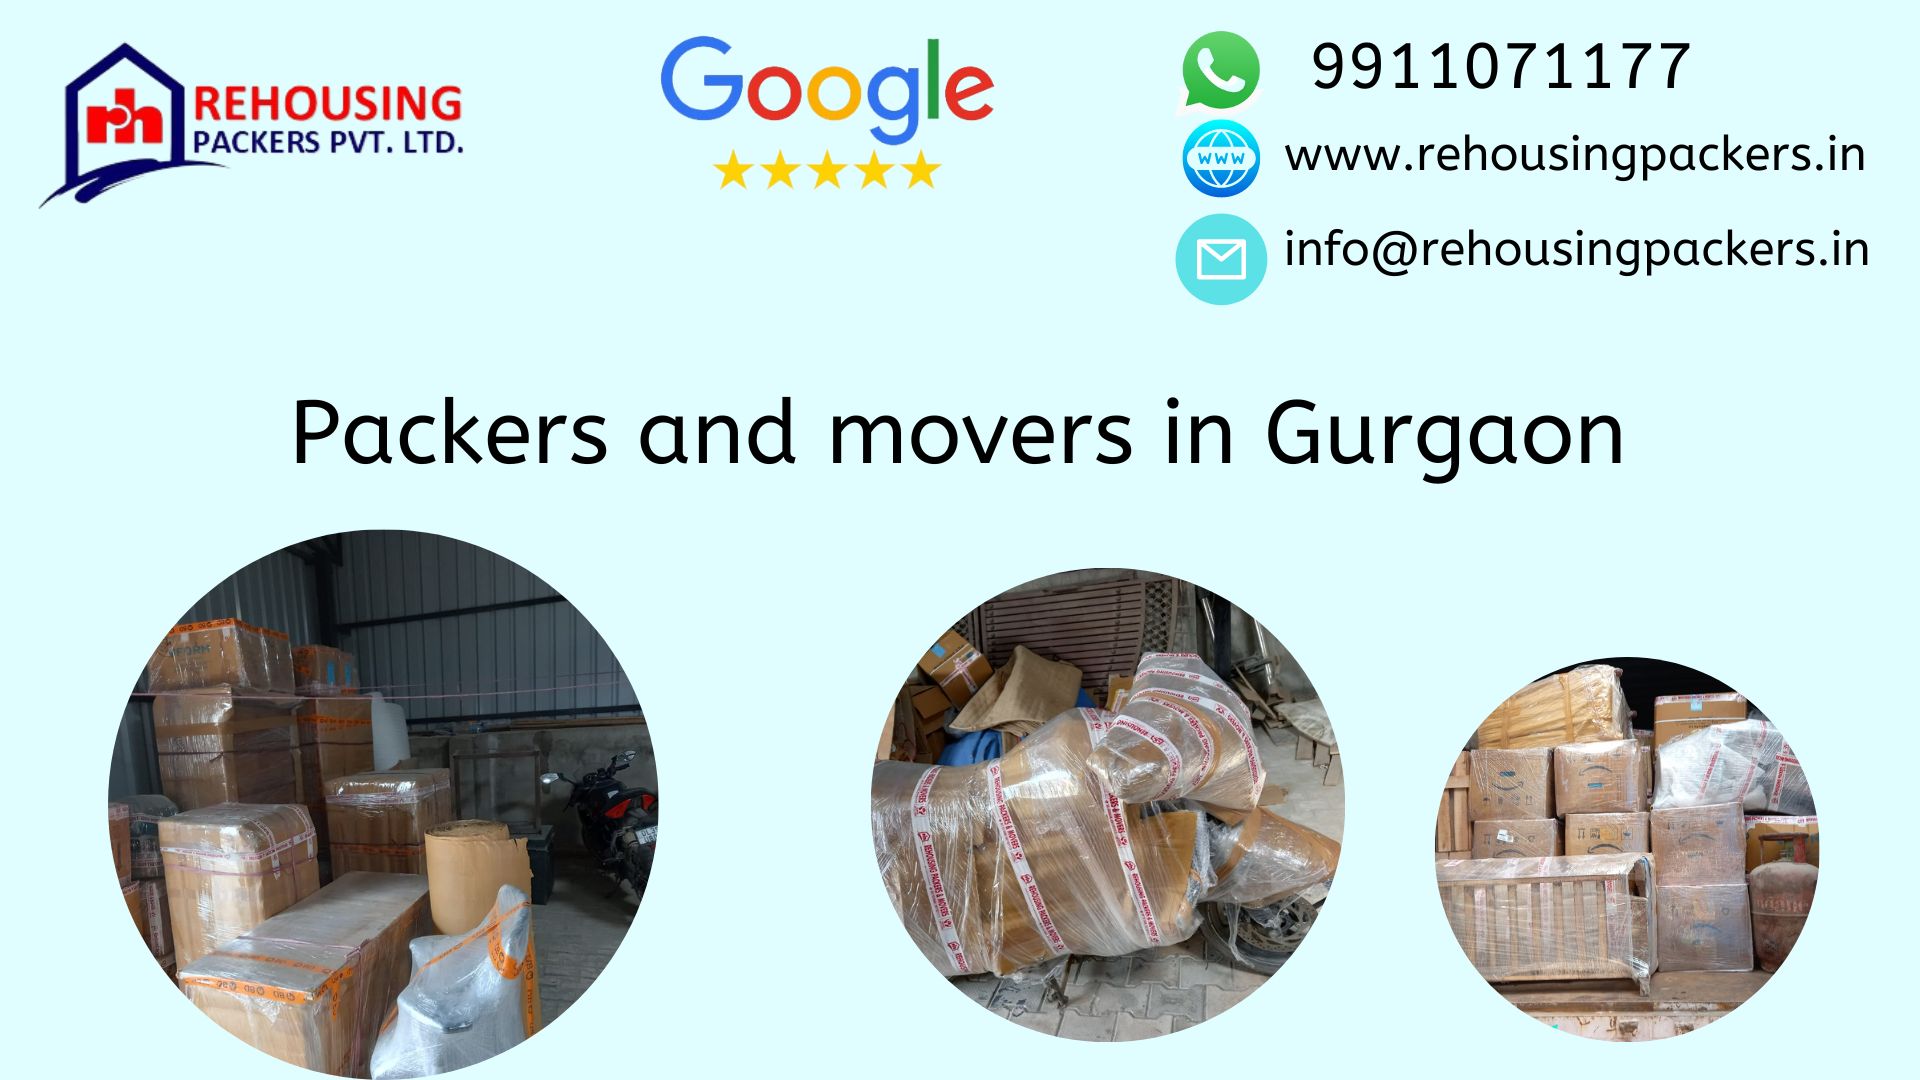 Hire top 10 packers and movers in Gurgaon | Rehousing Guide